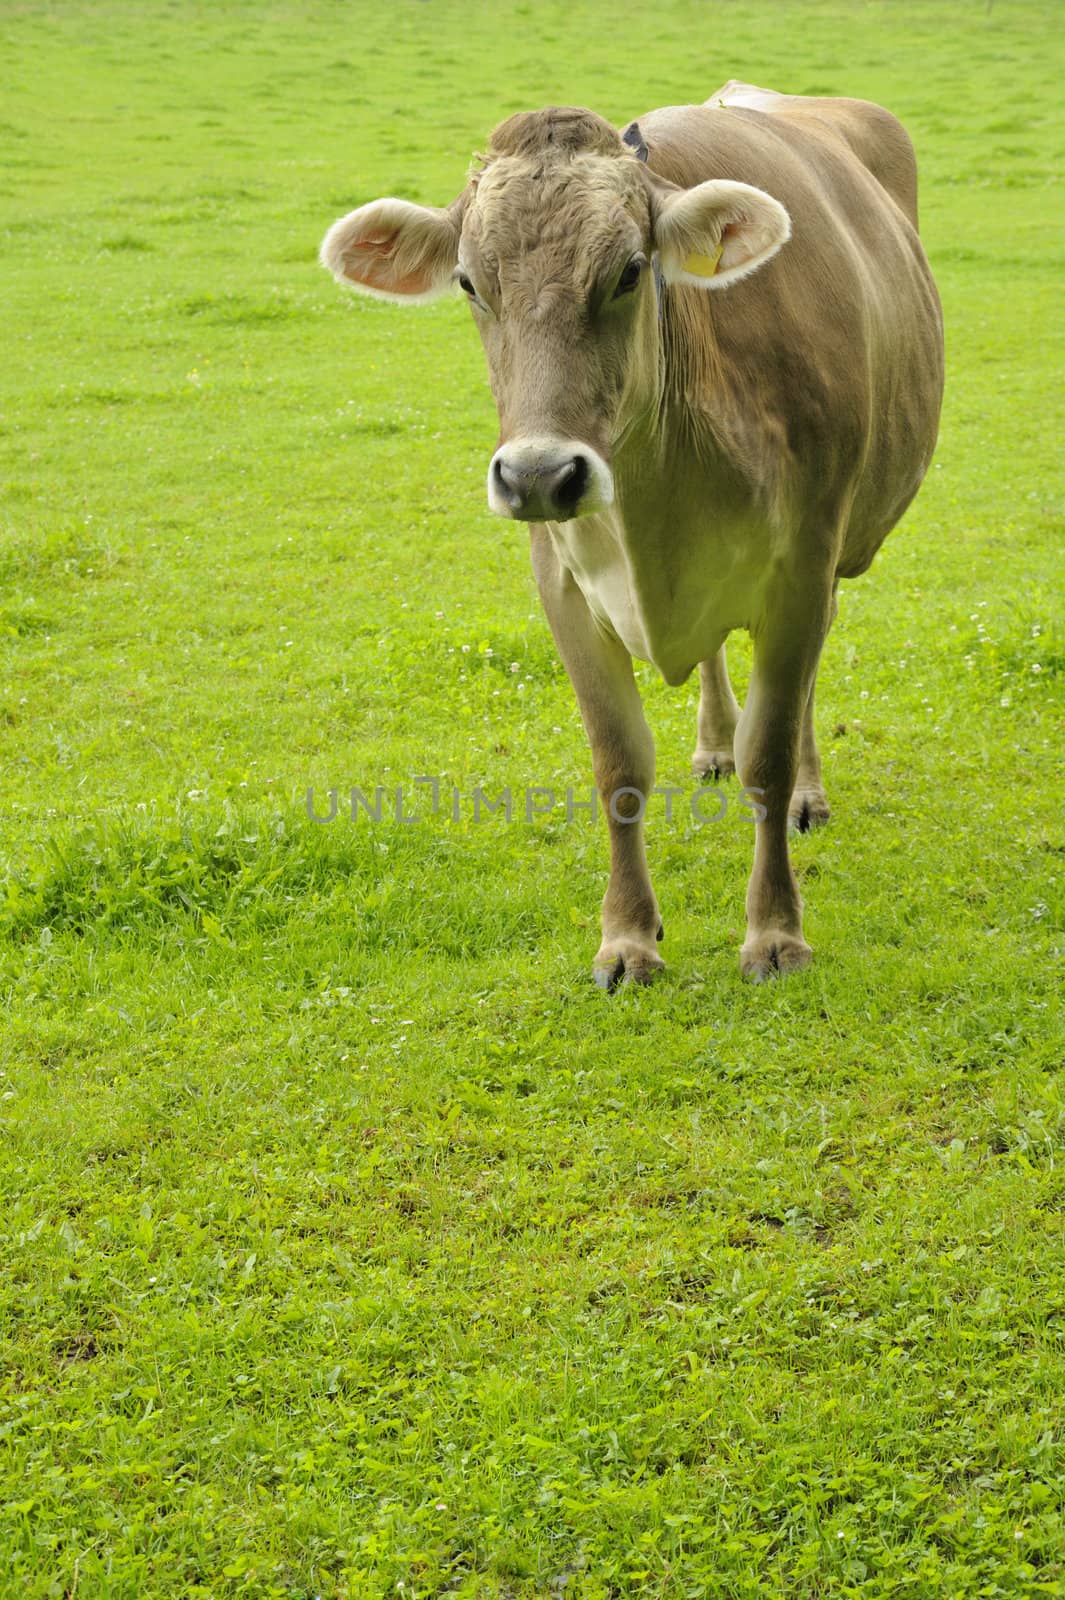 A jersey cow in a pasture at dawn. Space for copy bottom left.